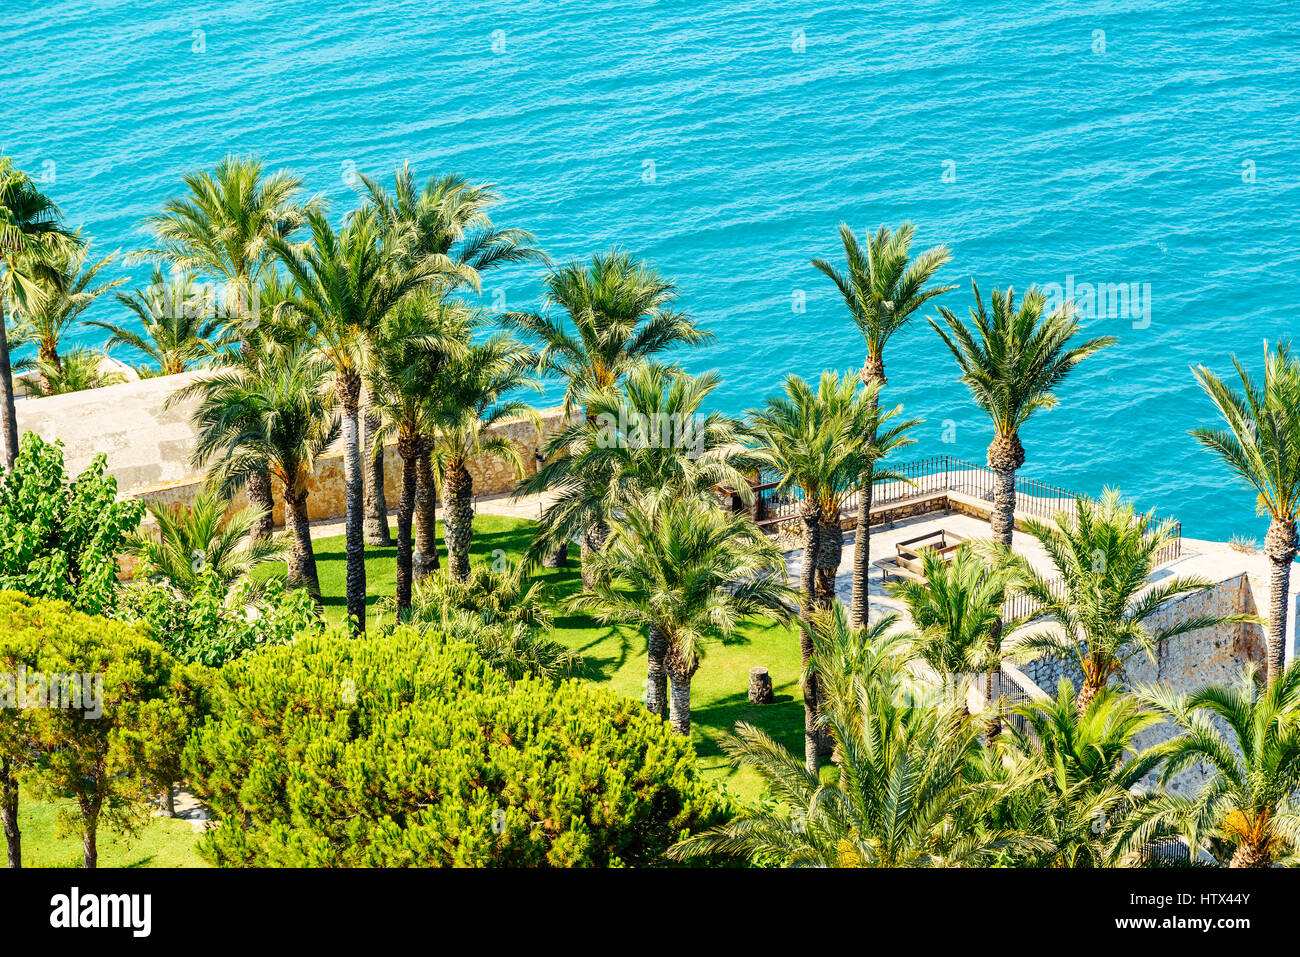 Aerial View Of Green Palm Trees And Blue Ocean Landscape Stock Photo